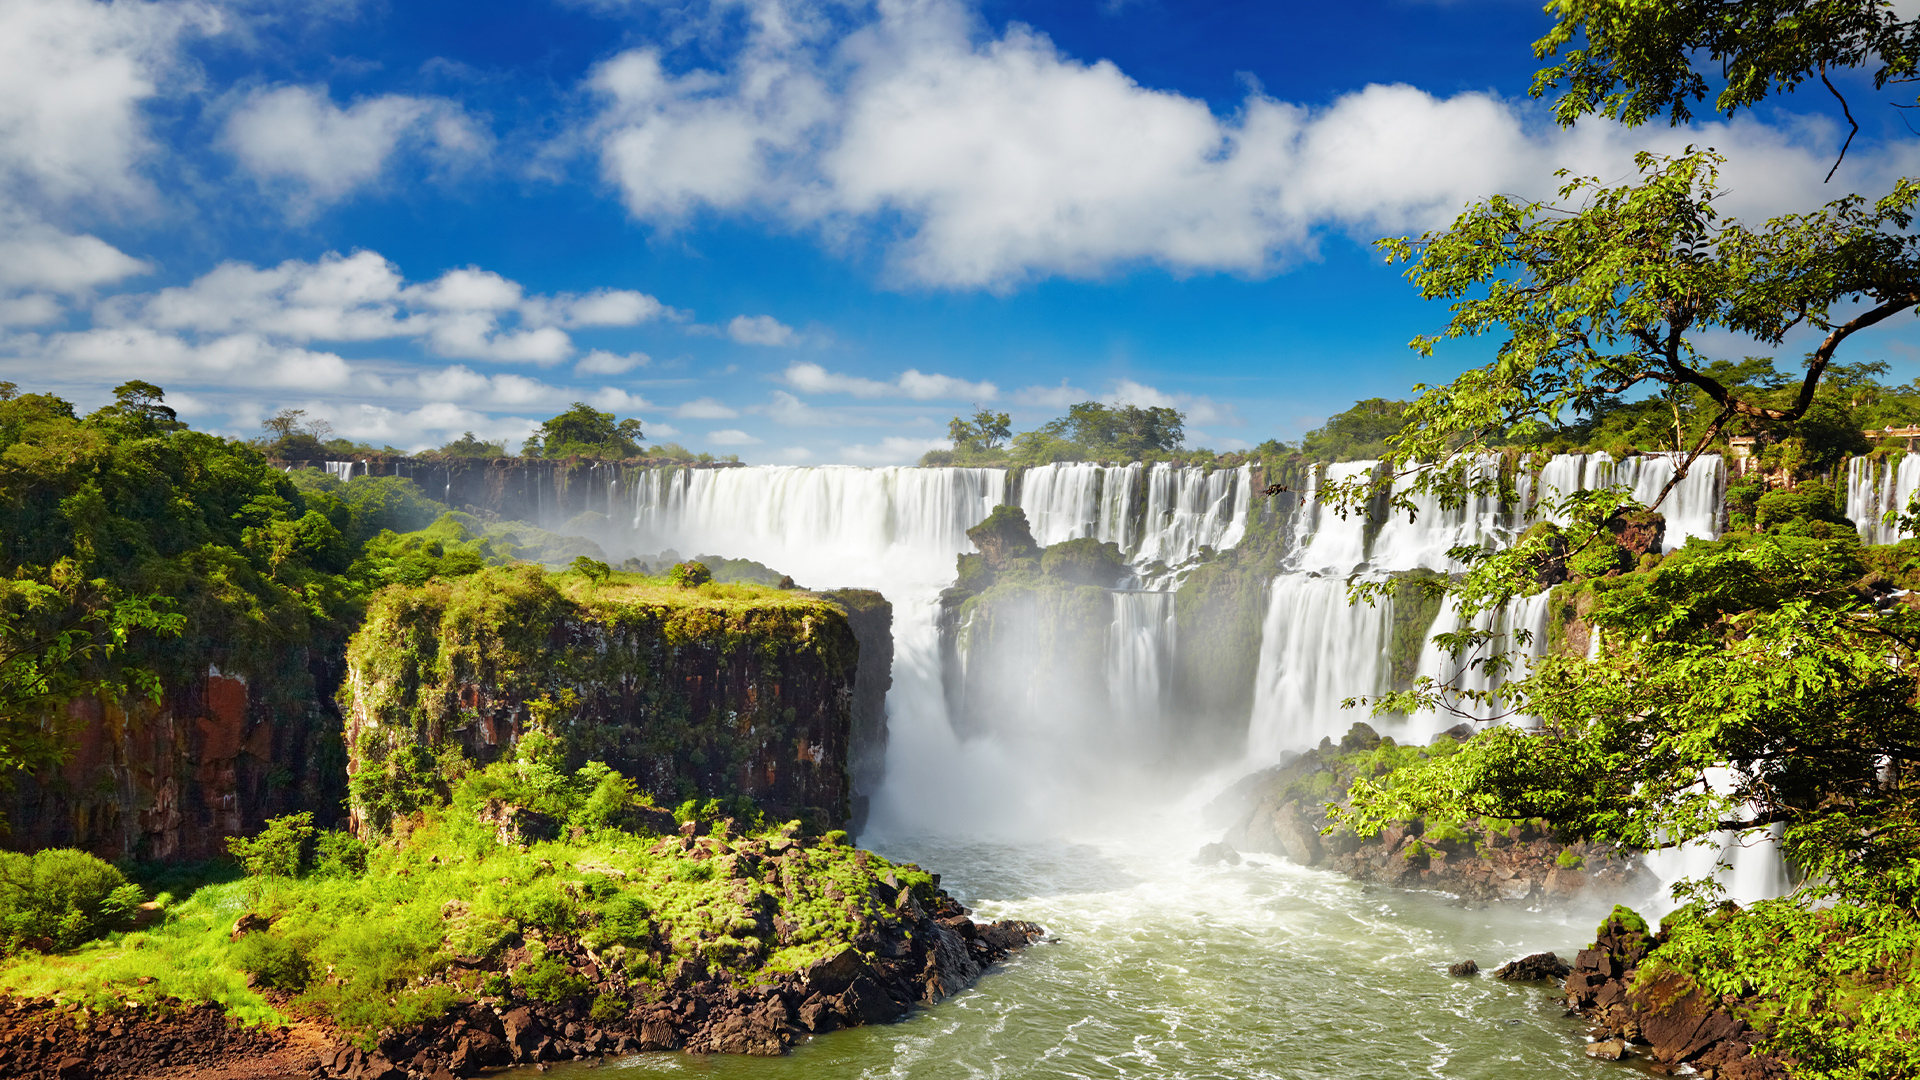 Destinations: The Iguassu Falls on the border of Brazil and Argentina, South America